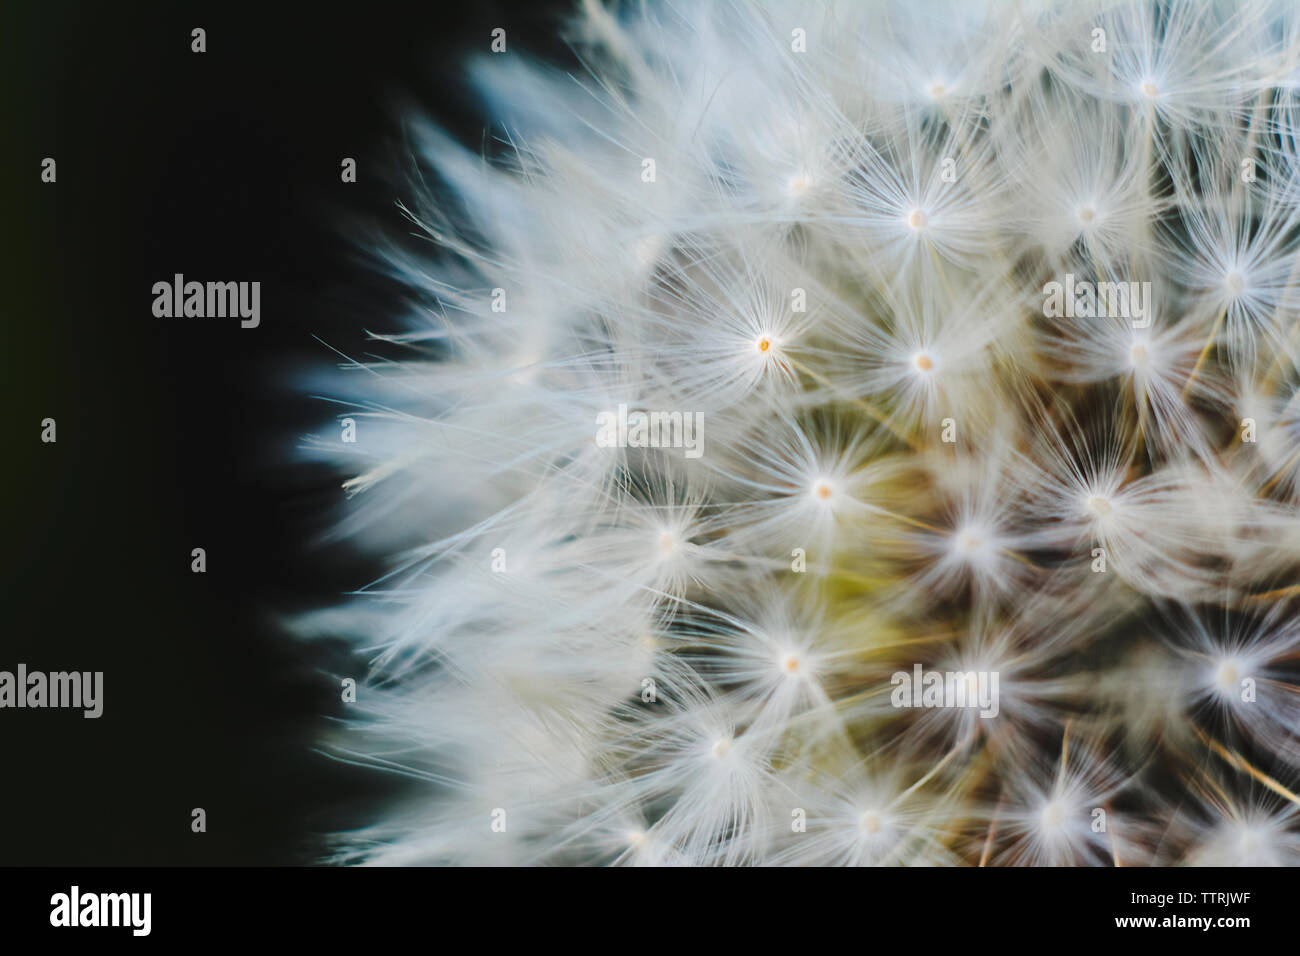 Close-up of dandelion seed against black background Stock Photo